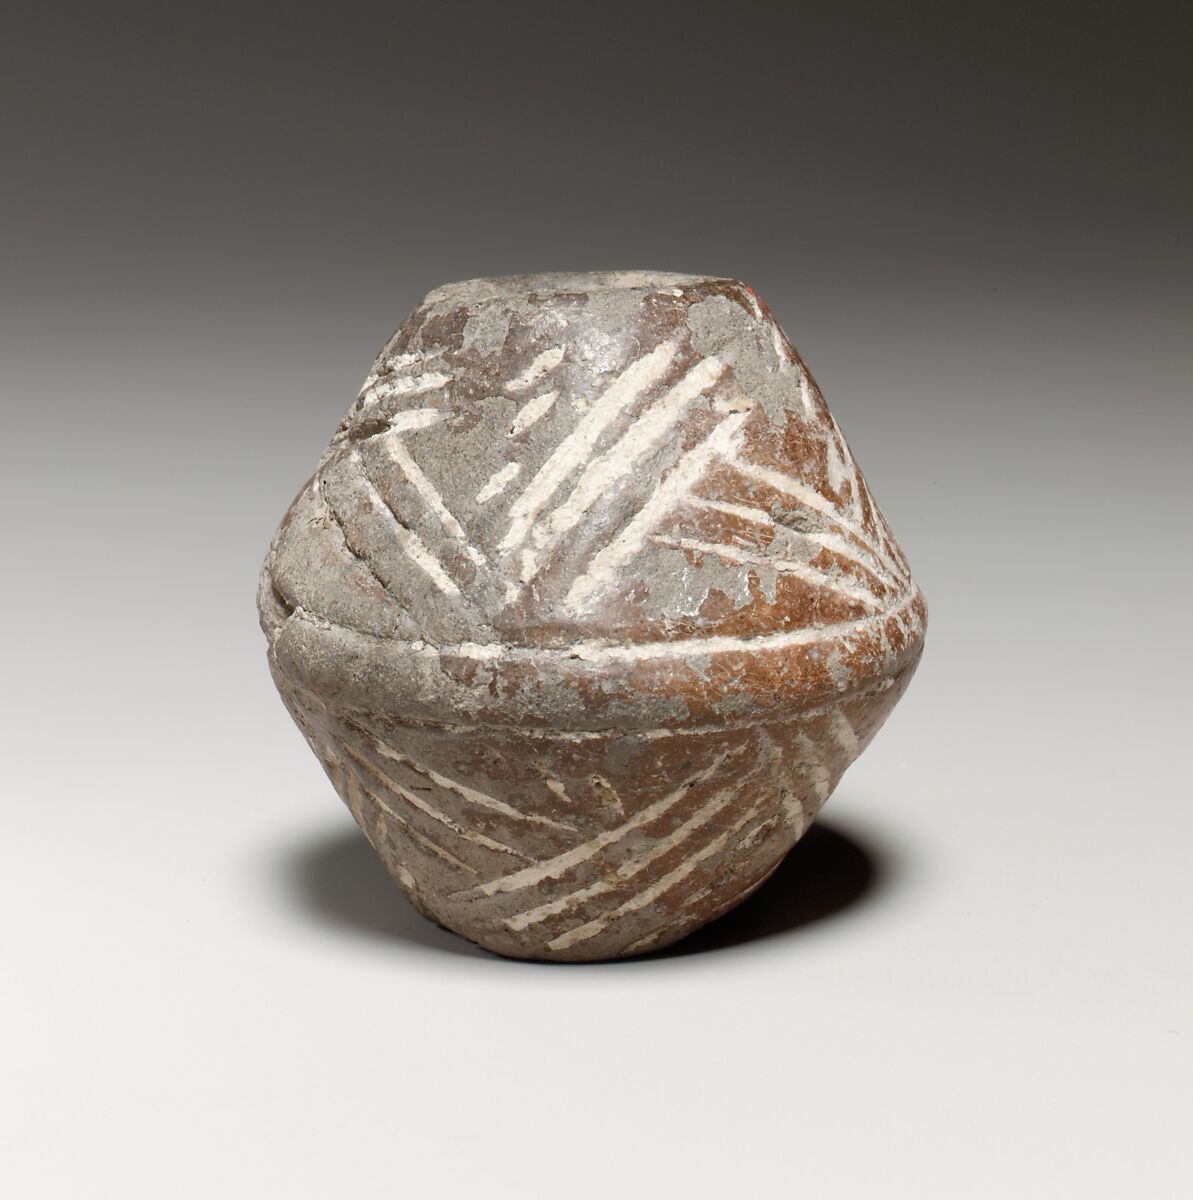 Terracotta biconical spindle-whorl with flat top, Terracotta, Cypriot 